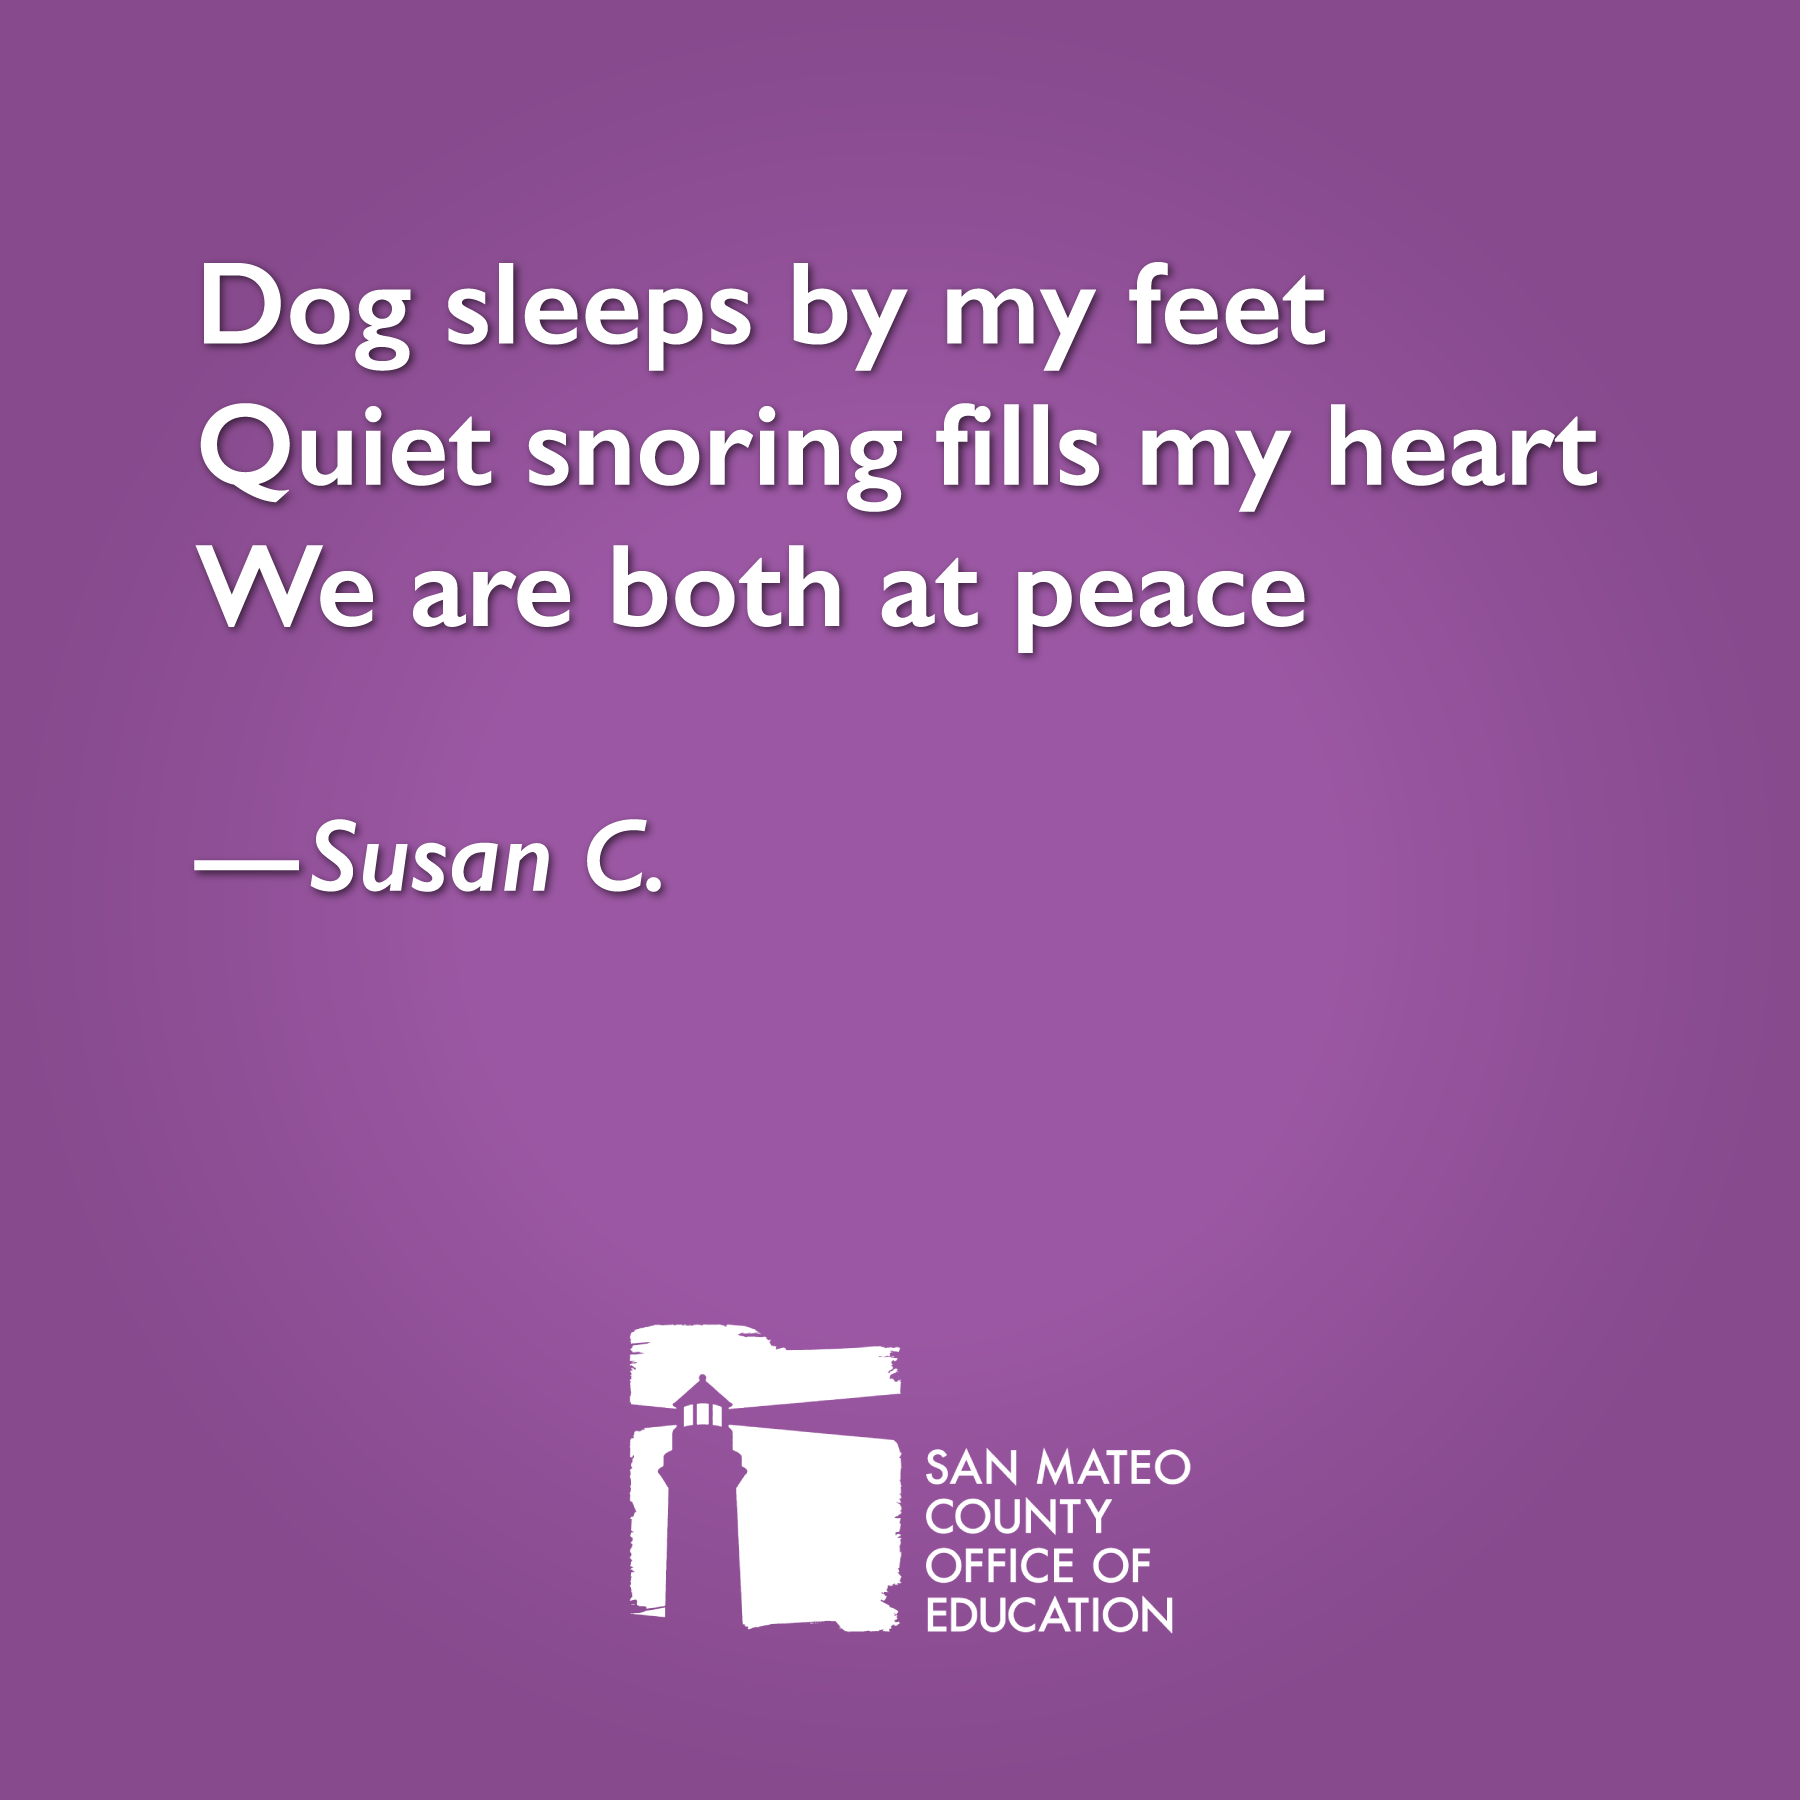 Dog sleeps by my feet Quiet snoring fills my heart We are both at peace. Written by Susan C.